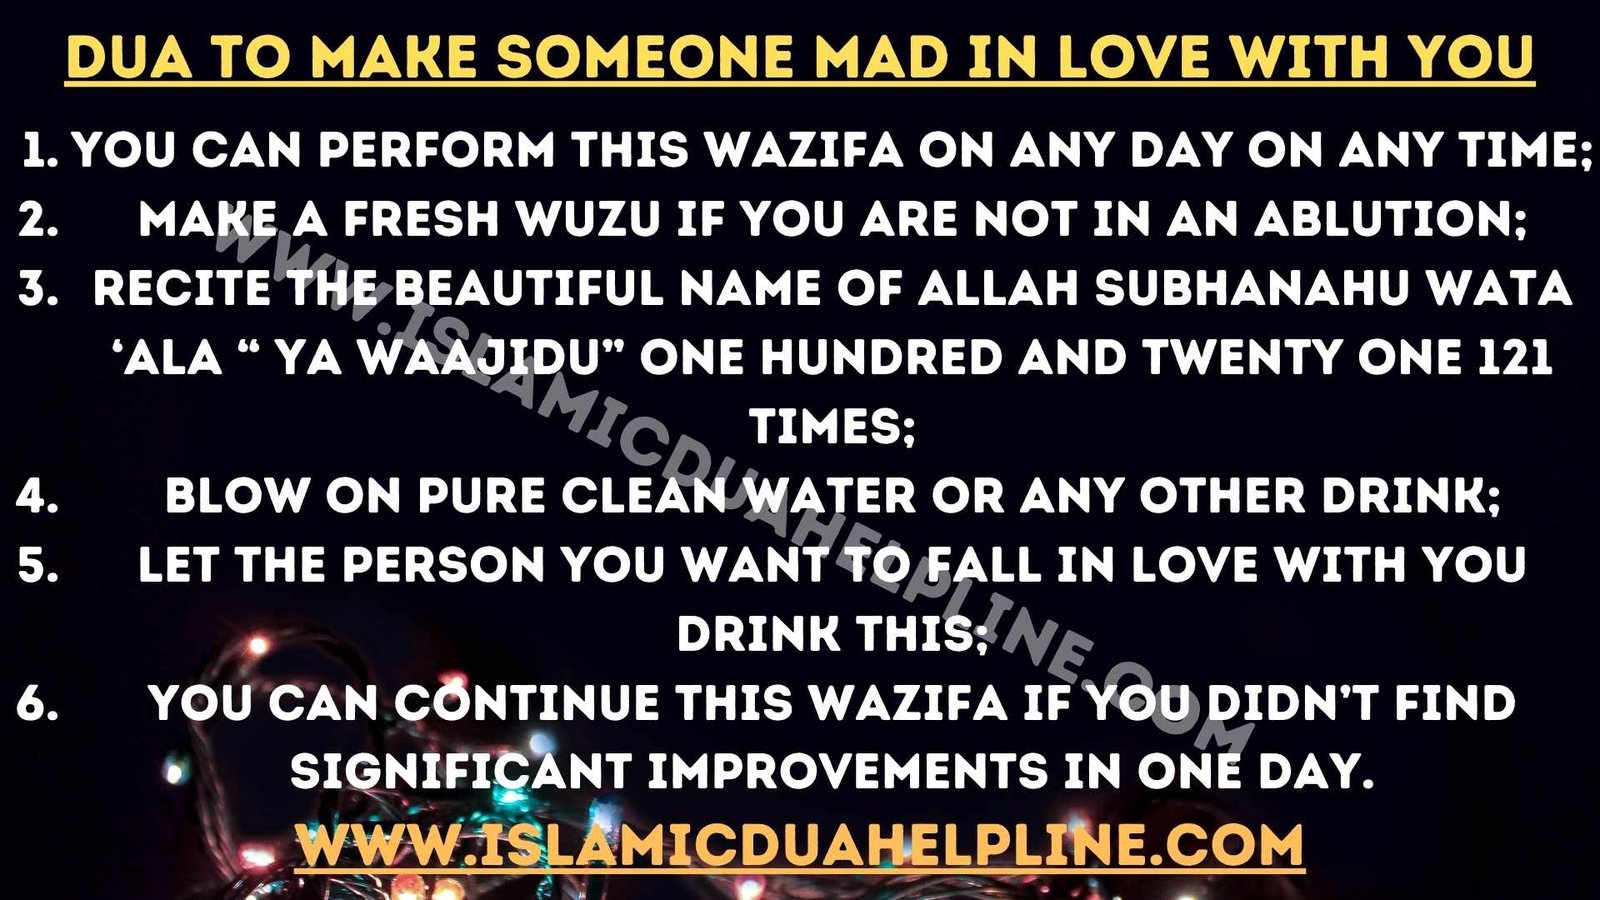 Dua To Make someone Mad In Love With You